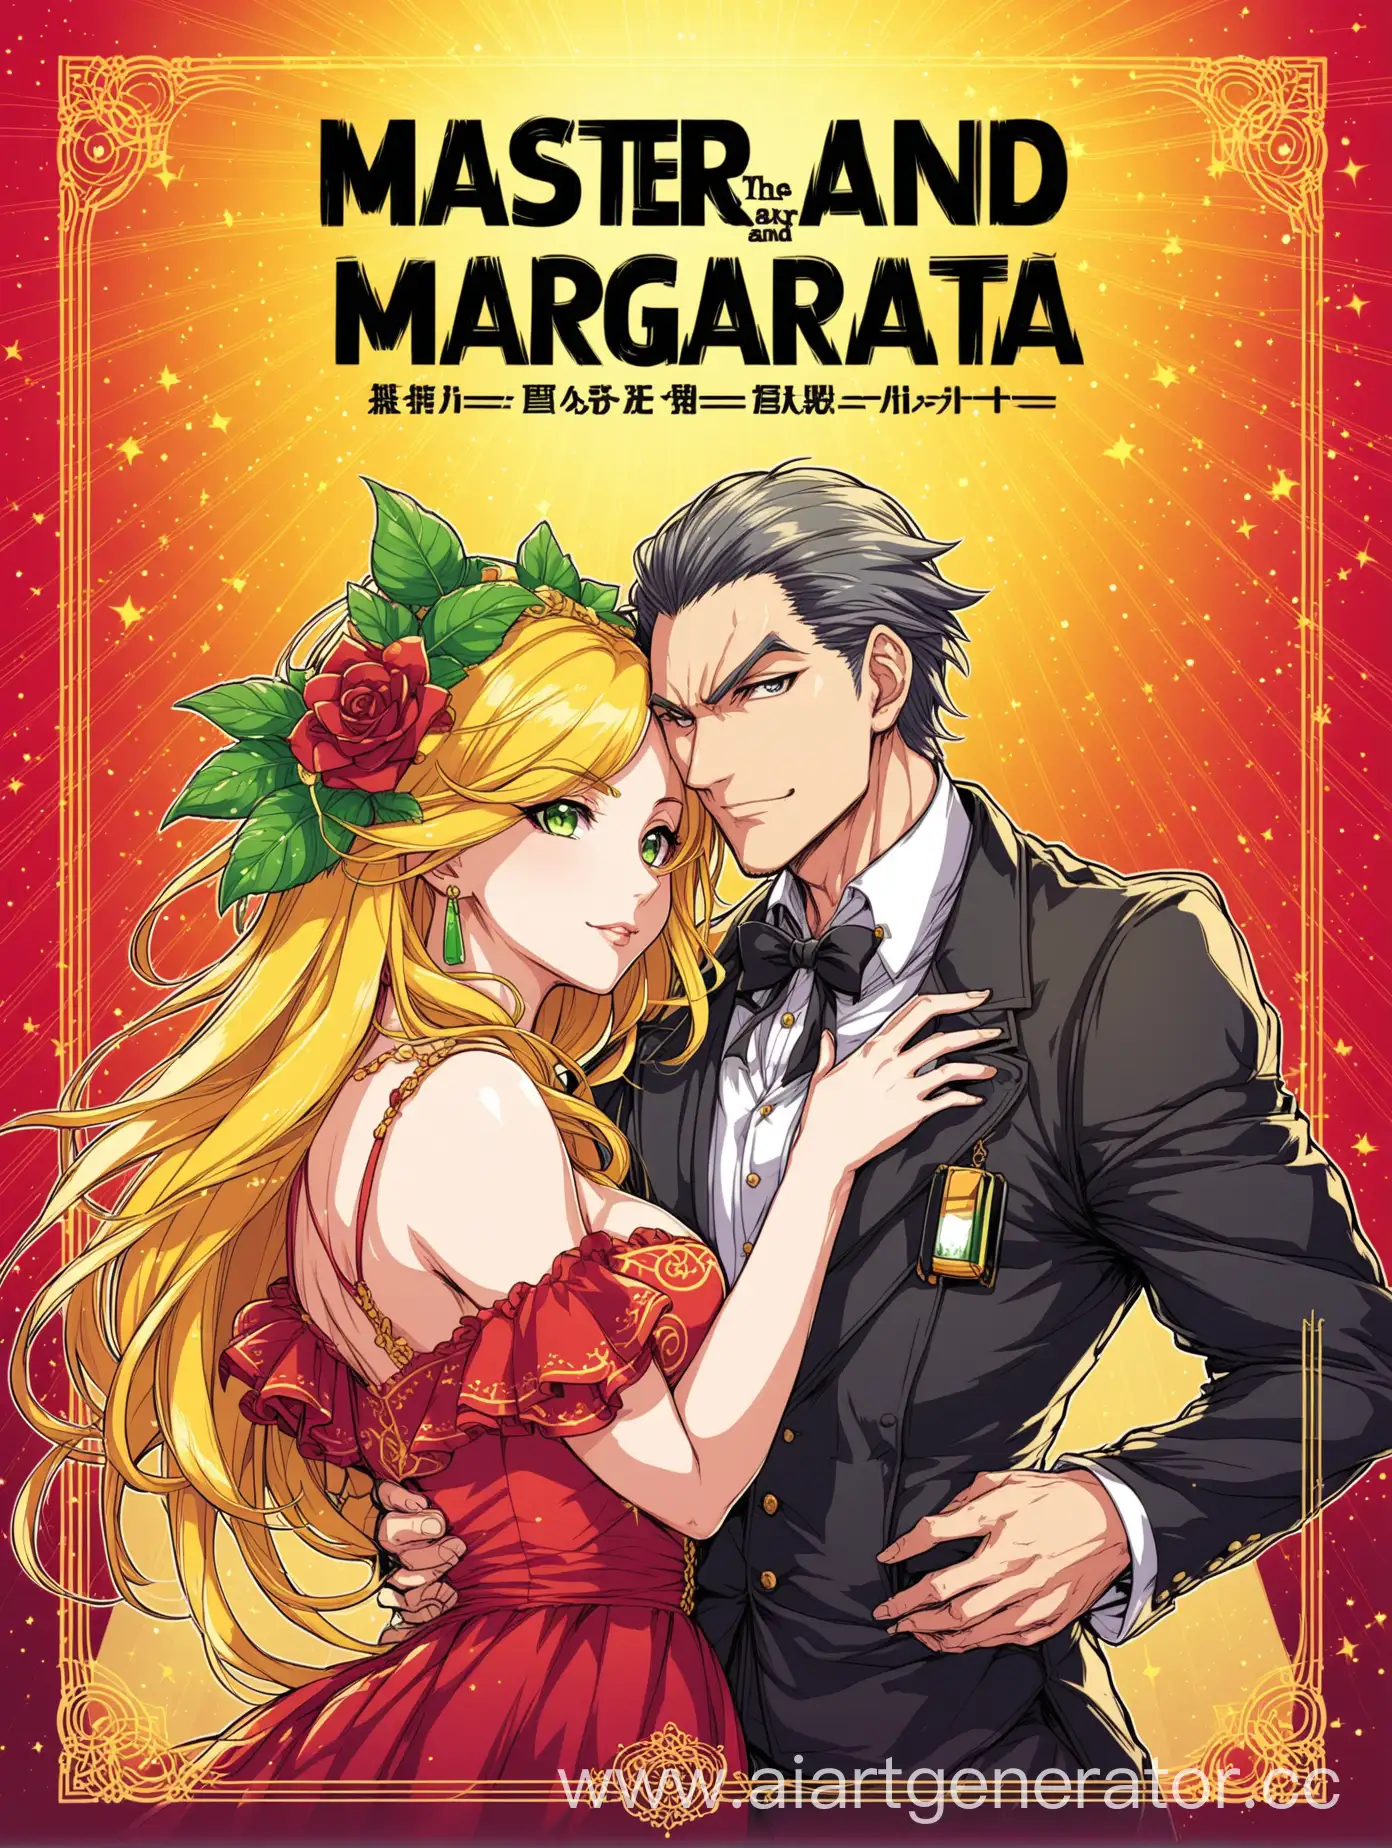 Anime-Style-Cover-Art-for-Master-and-Margarita-Book